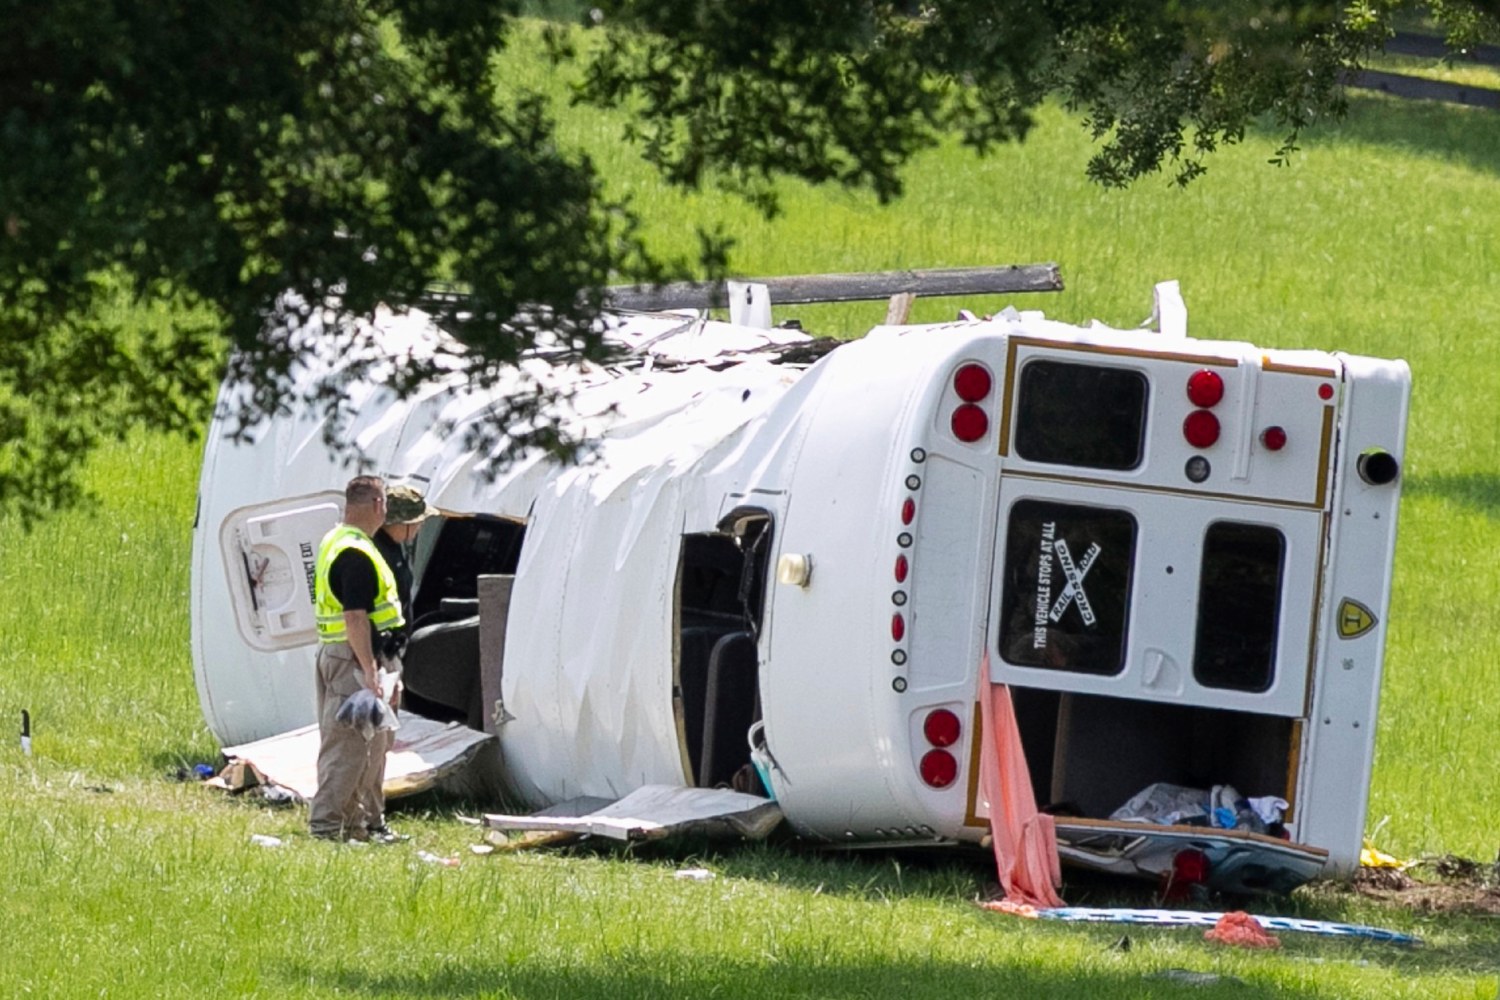 Driver in crash with bus that killed 8 farmworkers in Florida was in a crash 3 days earlier, judge said – NBC News